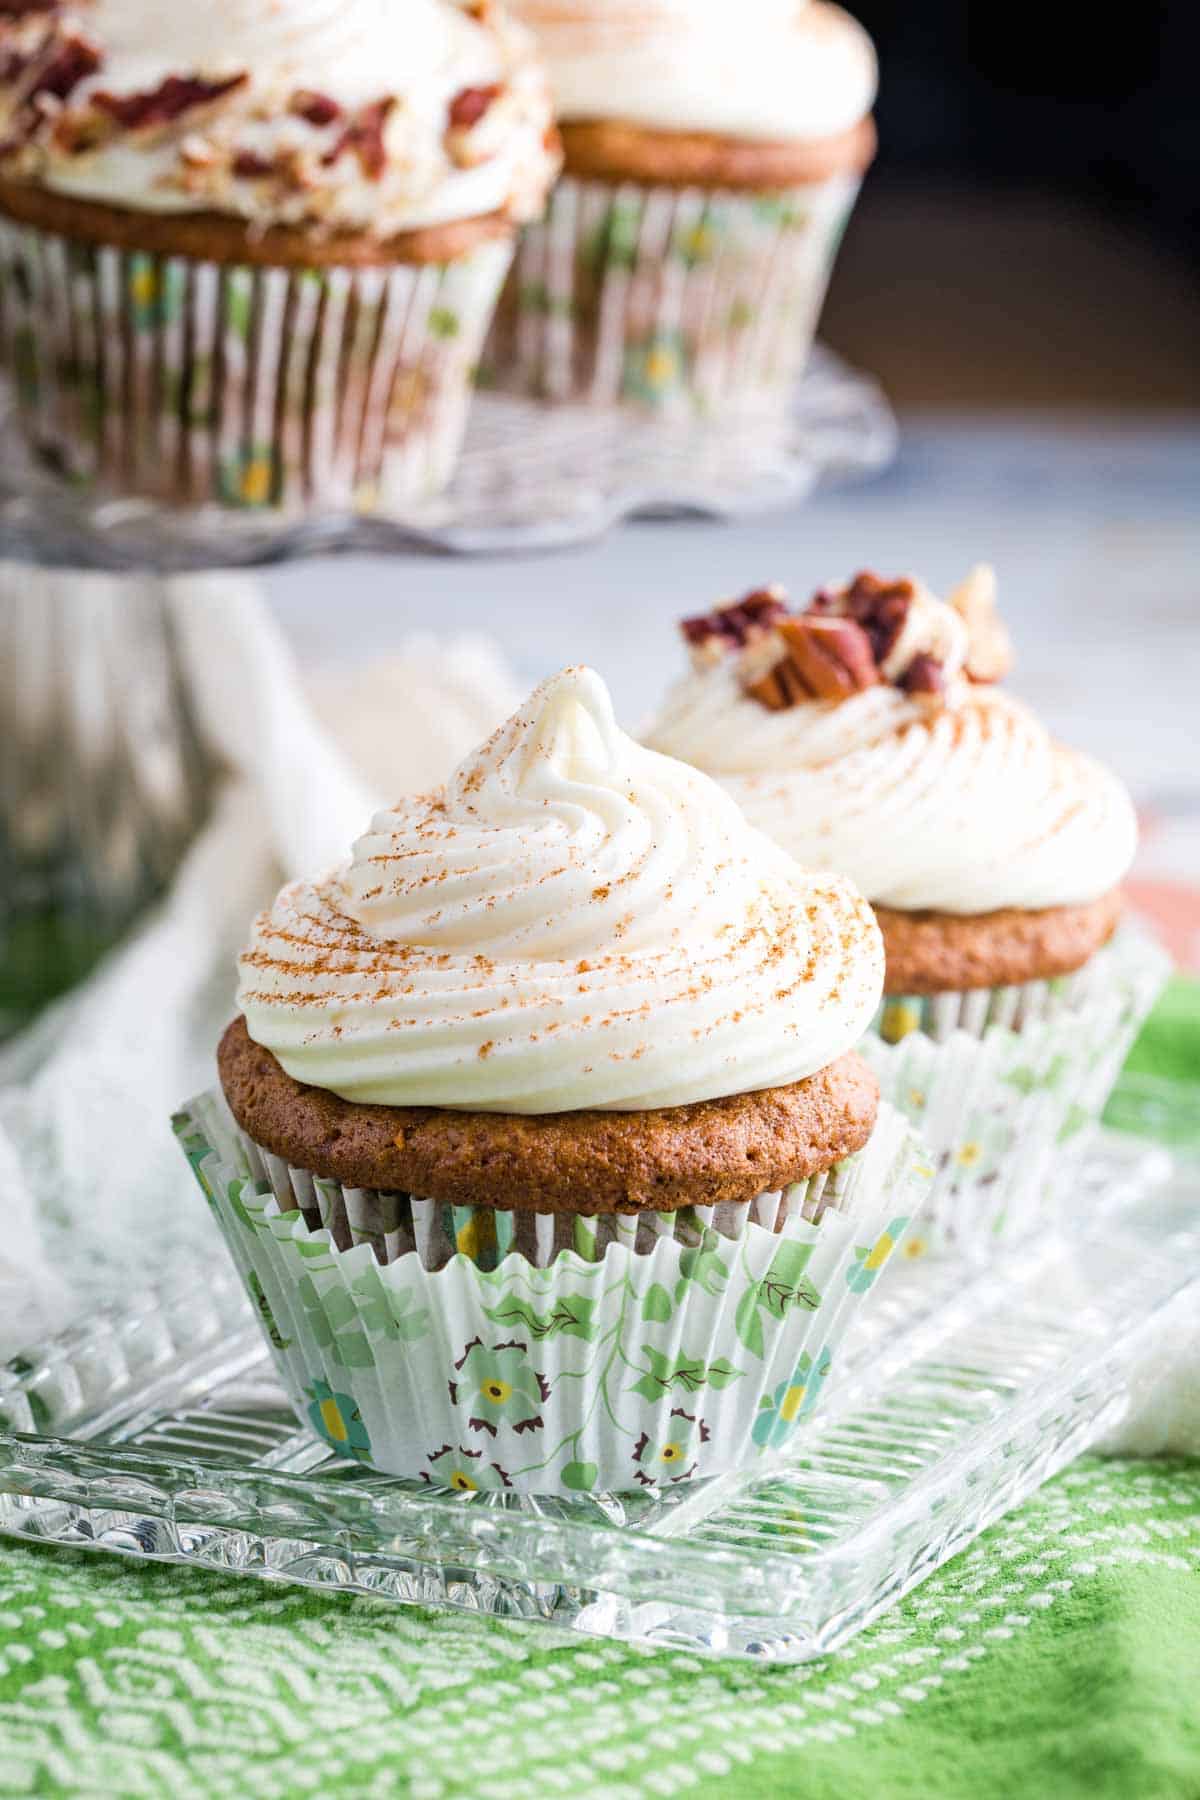 A side view of a cream cheese frosting-topped carrot cake cupcake.